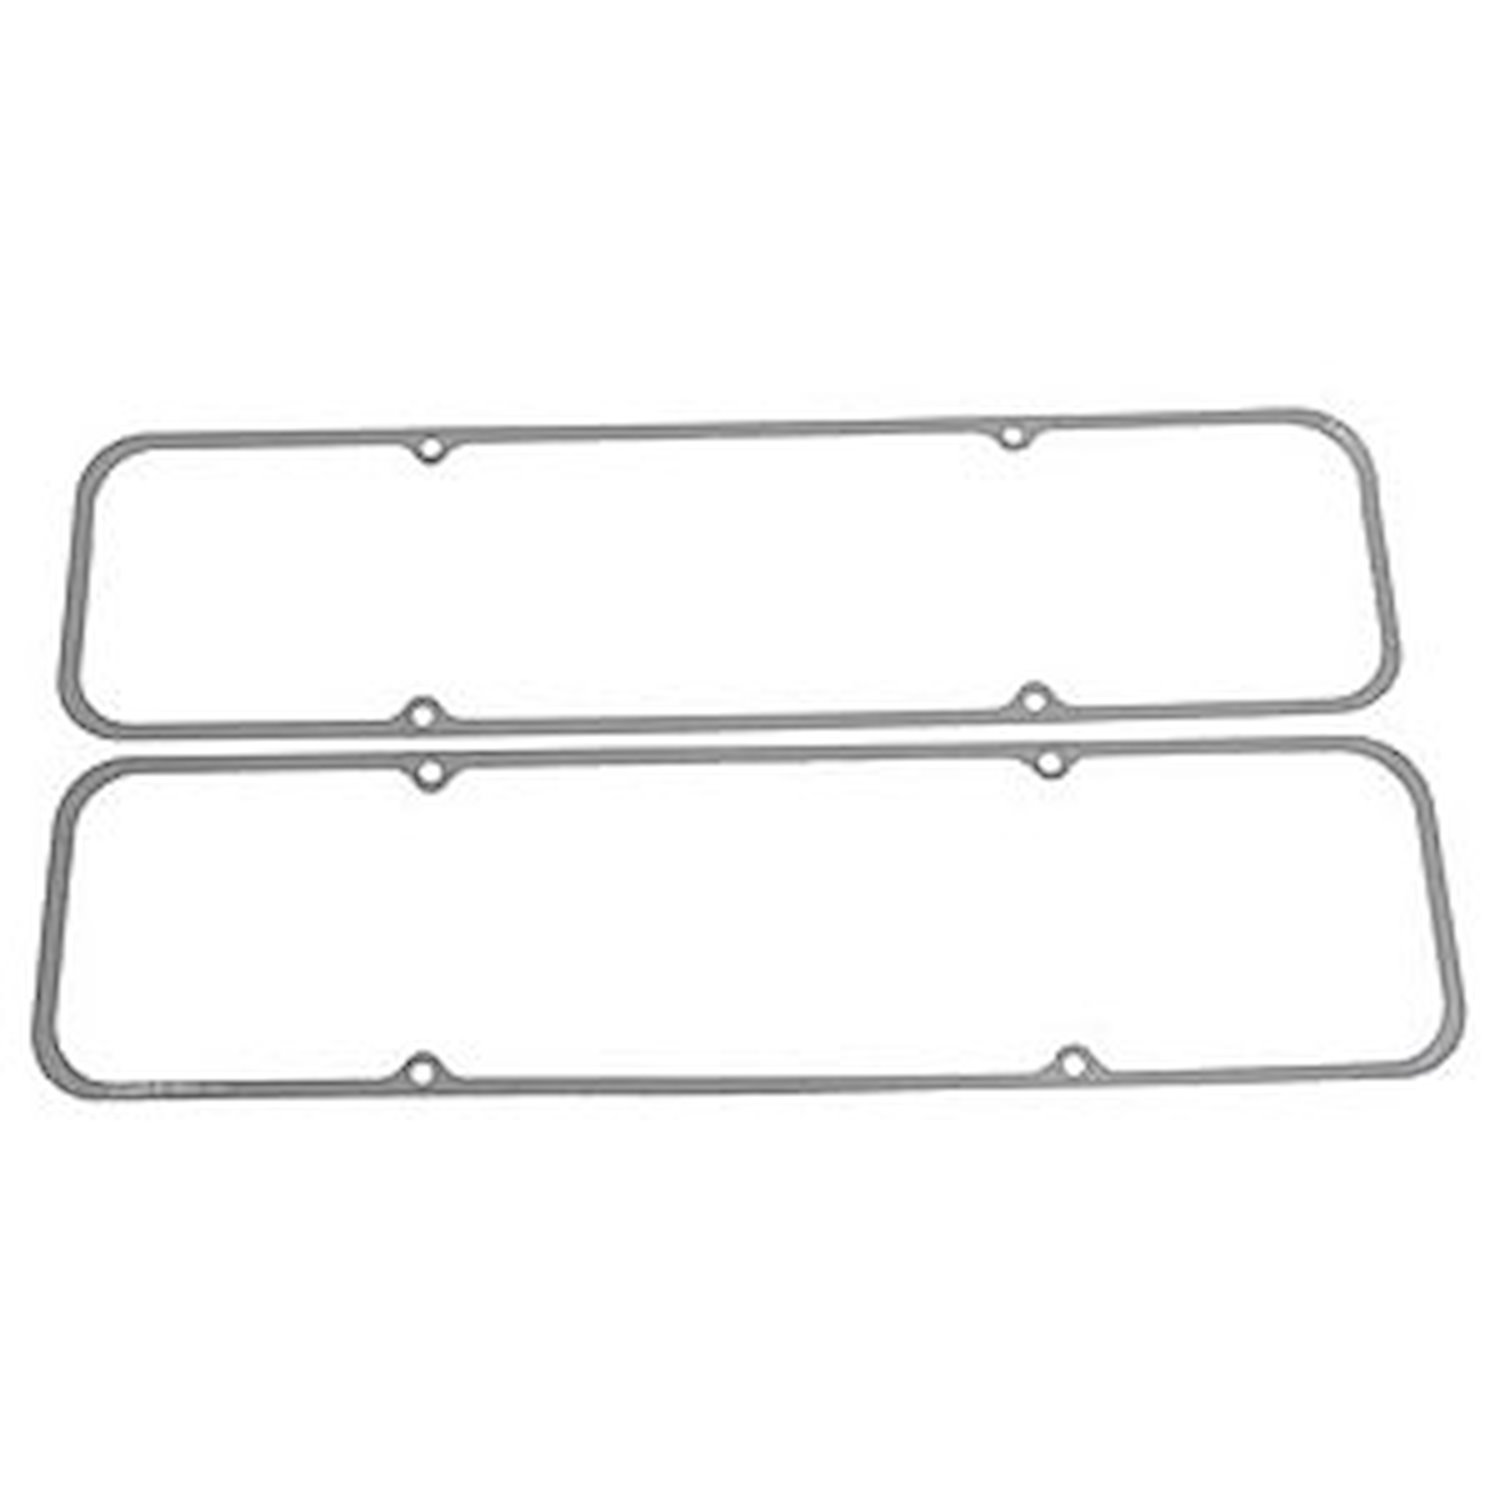 Valve Cover Gaskets Chevy Big Block